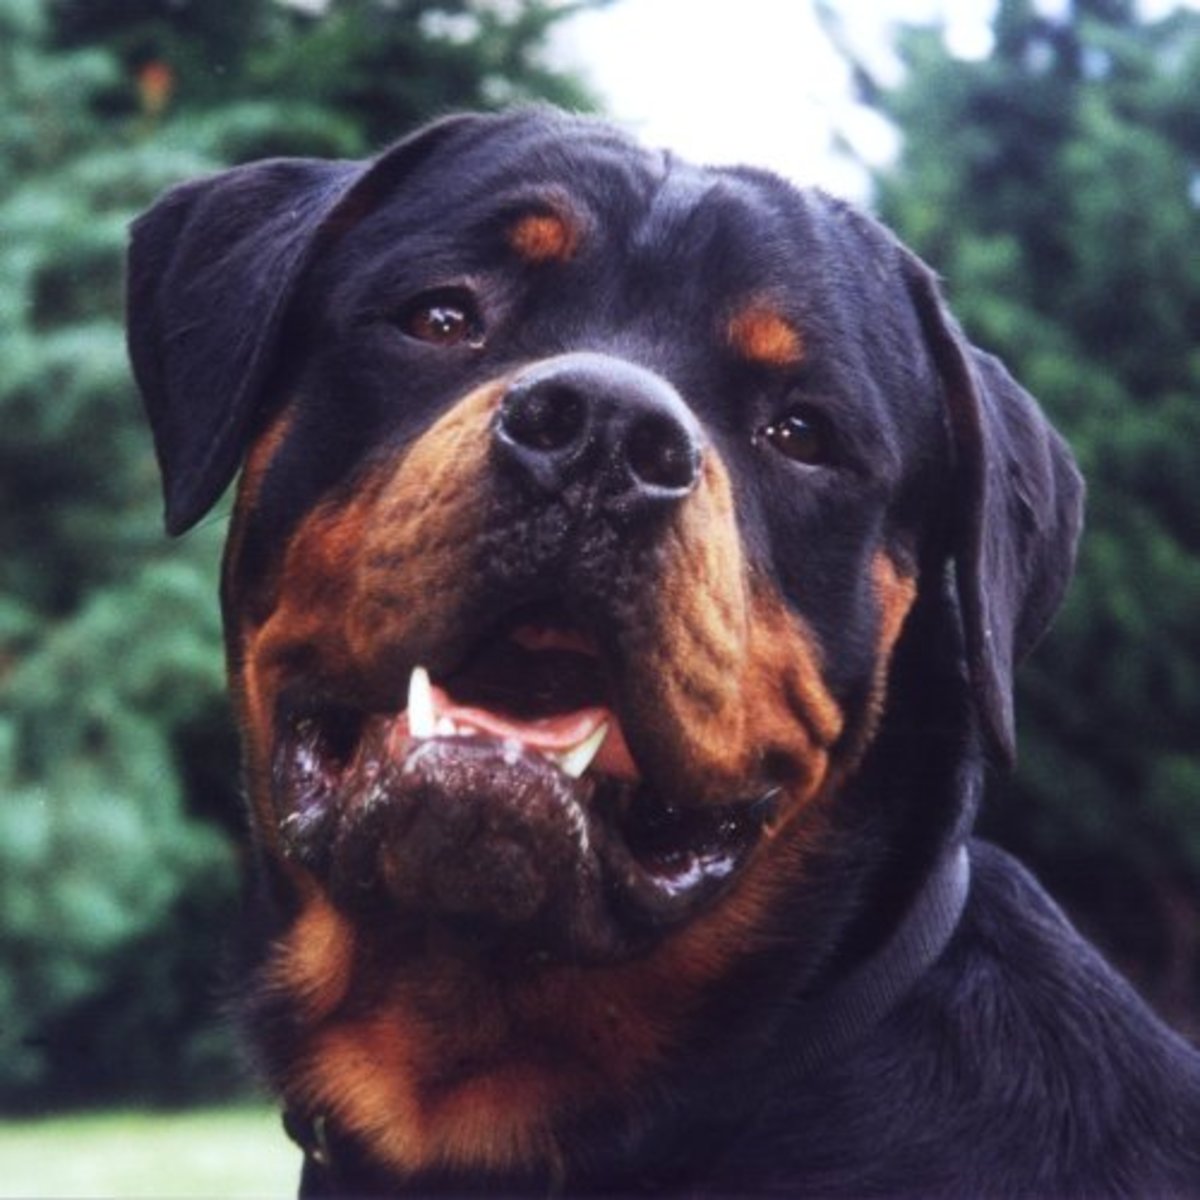 How to Raise a Well-Trained, Non-Aggressive Rottweiler